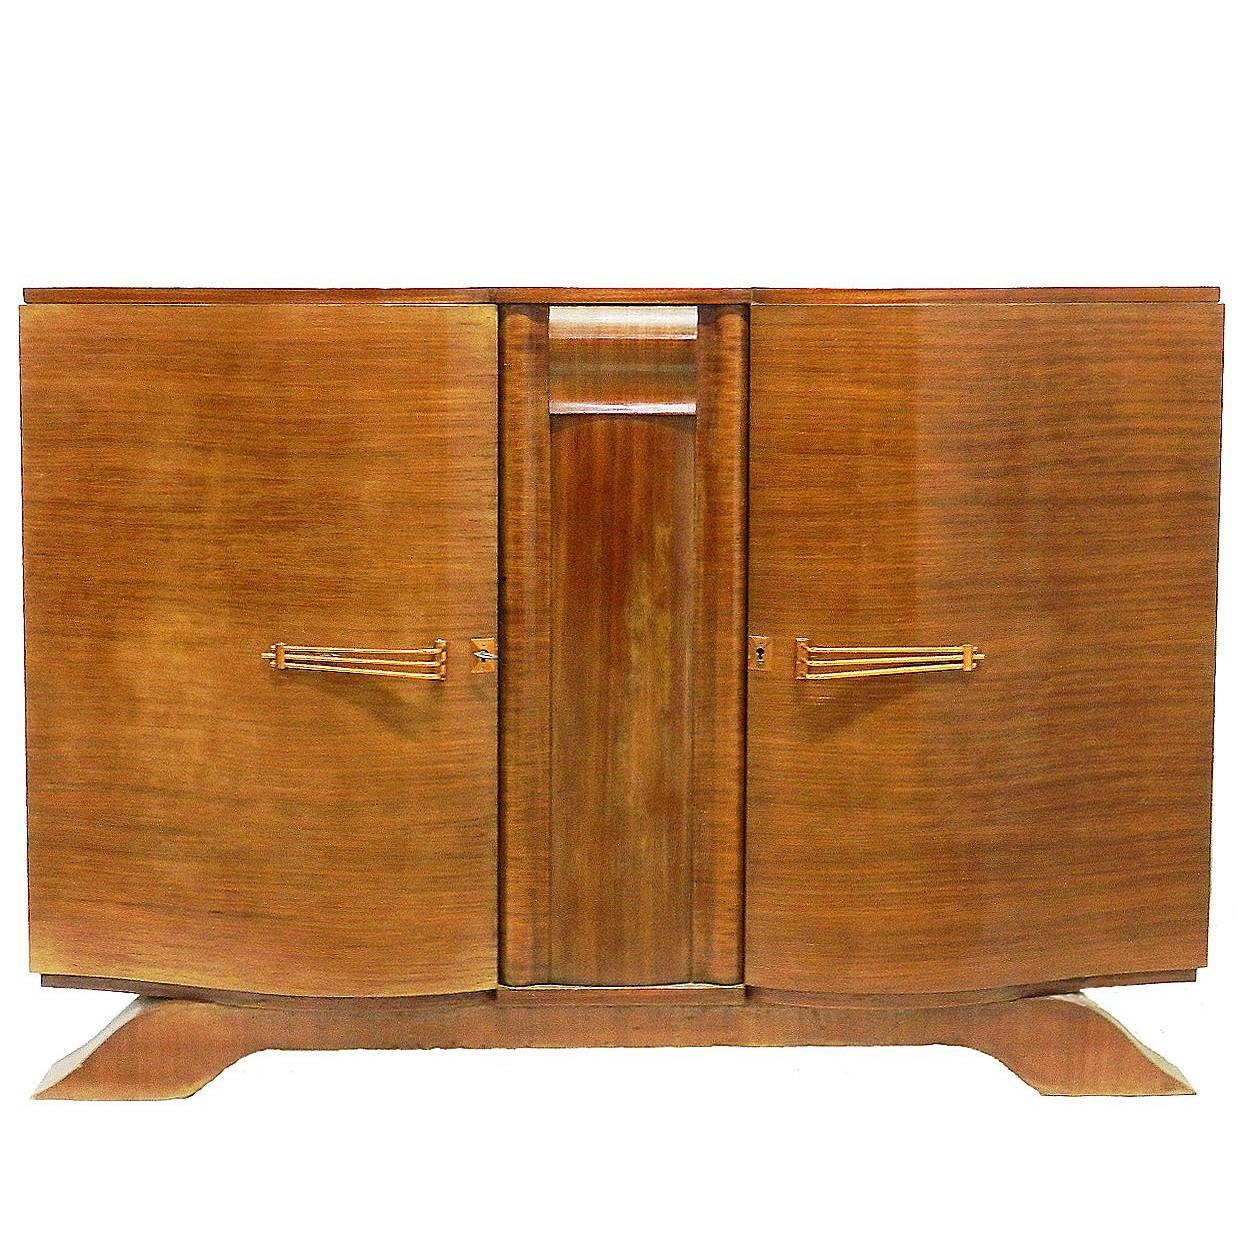 Art Deco Credenza Sideboard Buffet French, circa 1930 FREE SHIPPING options For Sale